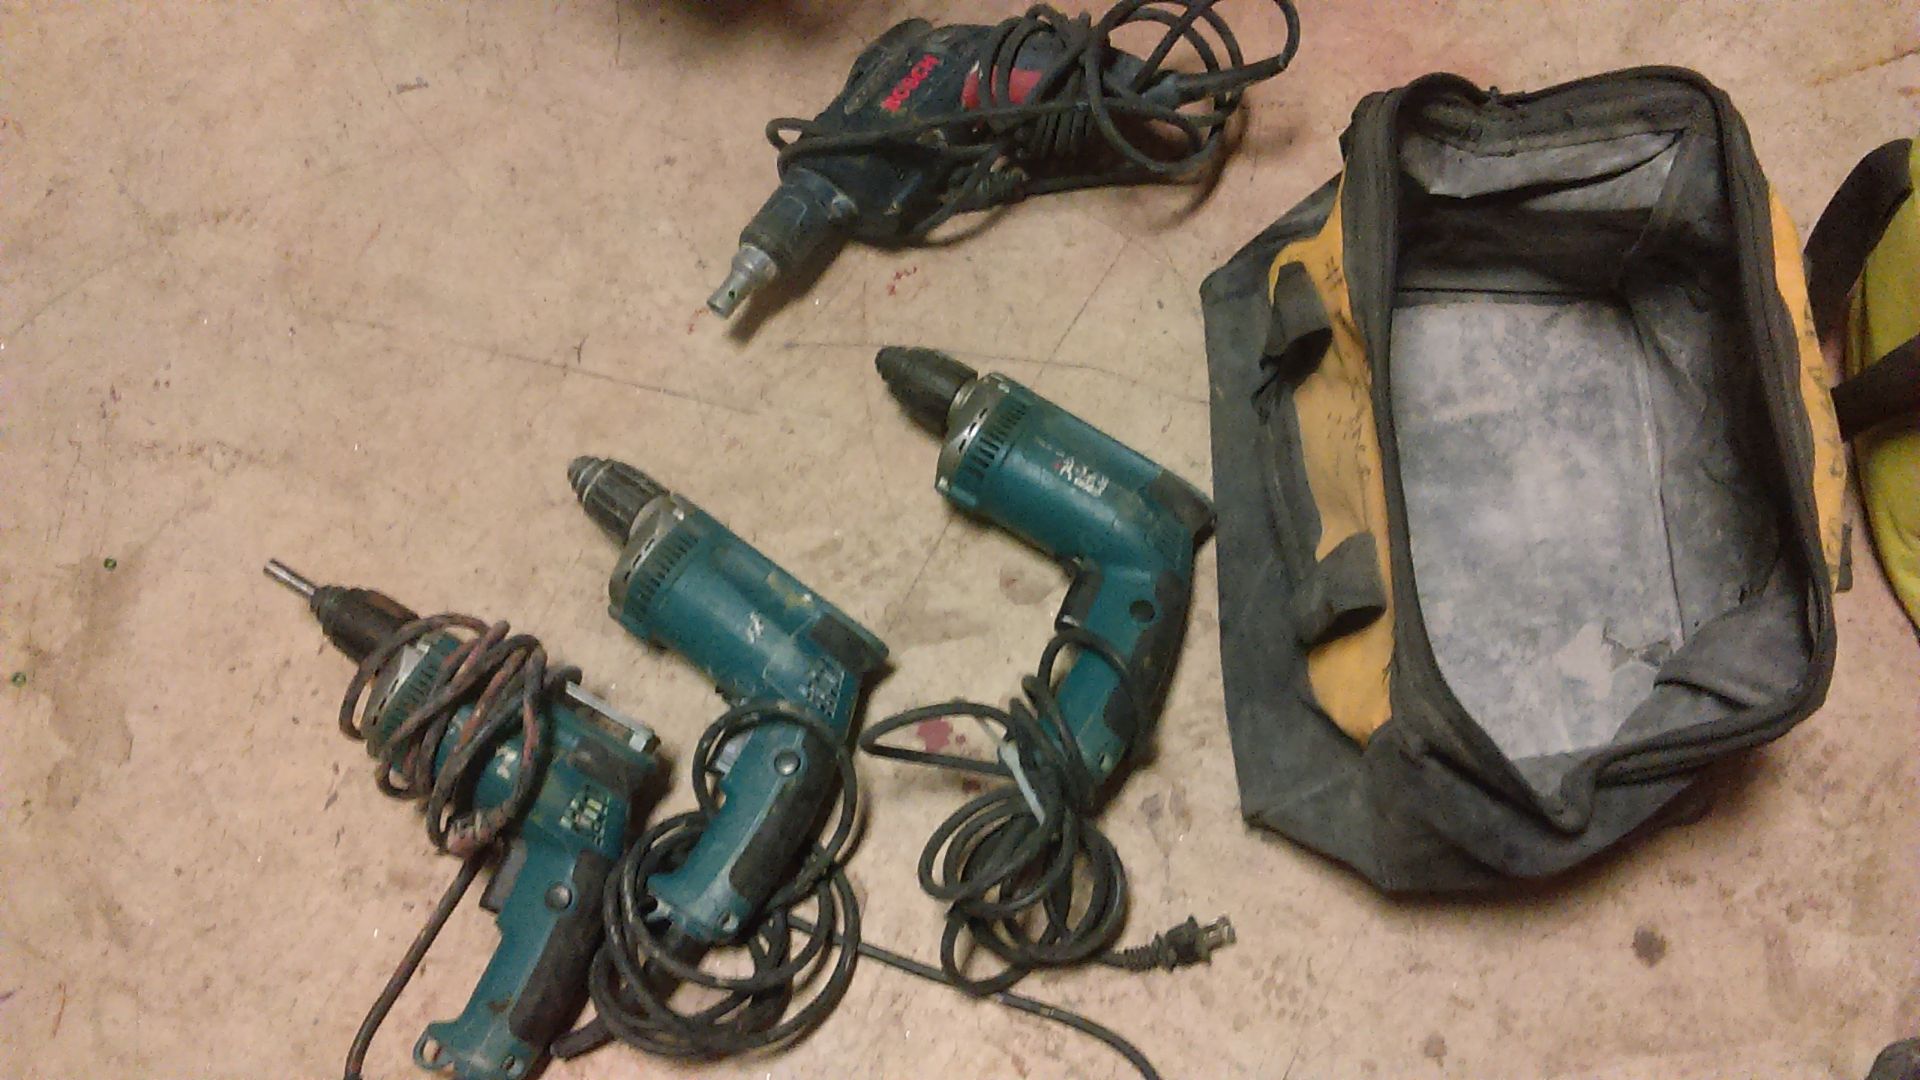 LOT OF: (1) BOSCH CORDED DRYWALL DRILL AND (3) MAKITA CORDED DRILLS --ALL IN DEWALT BAG